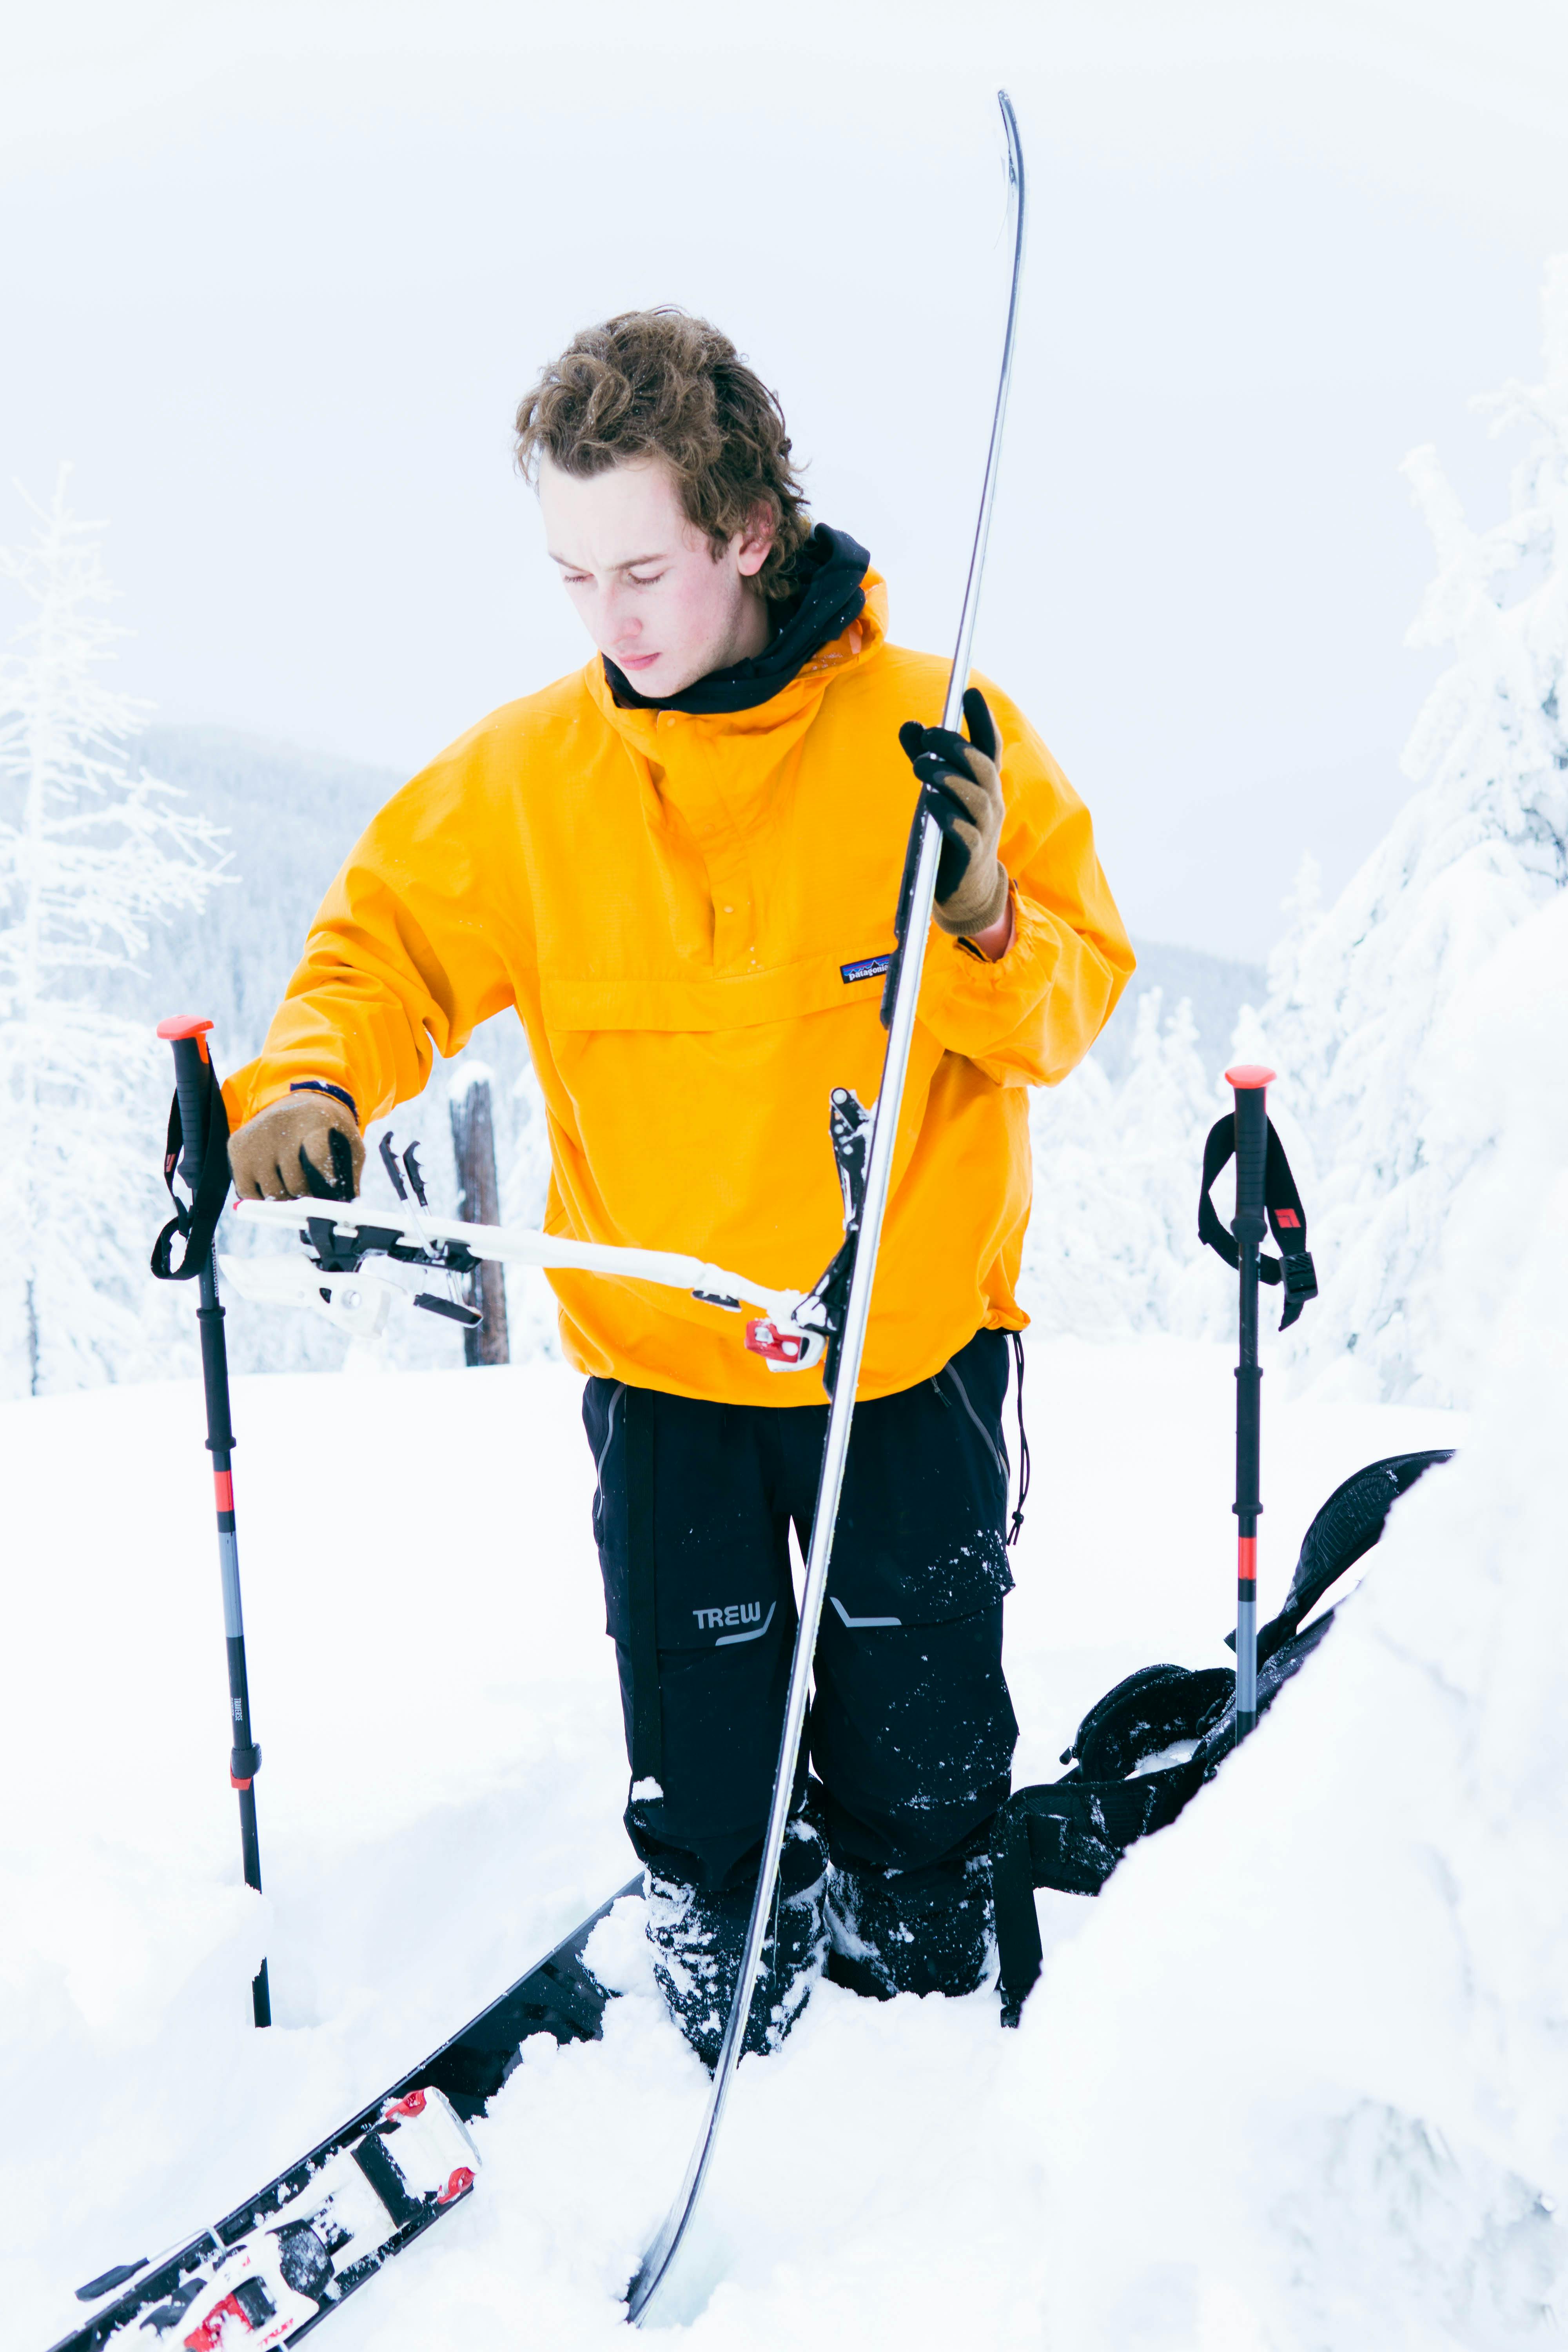 A man in a yellow jacket gets his skis set up while standing deep in the snow.